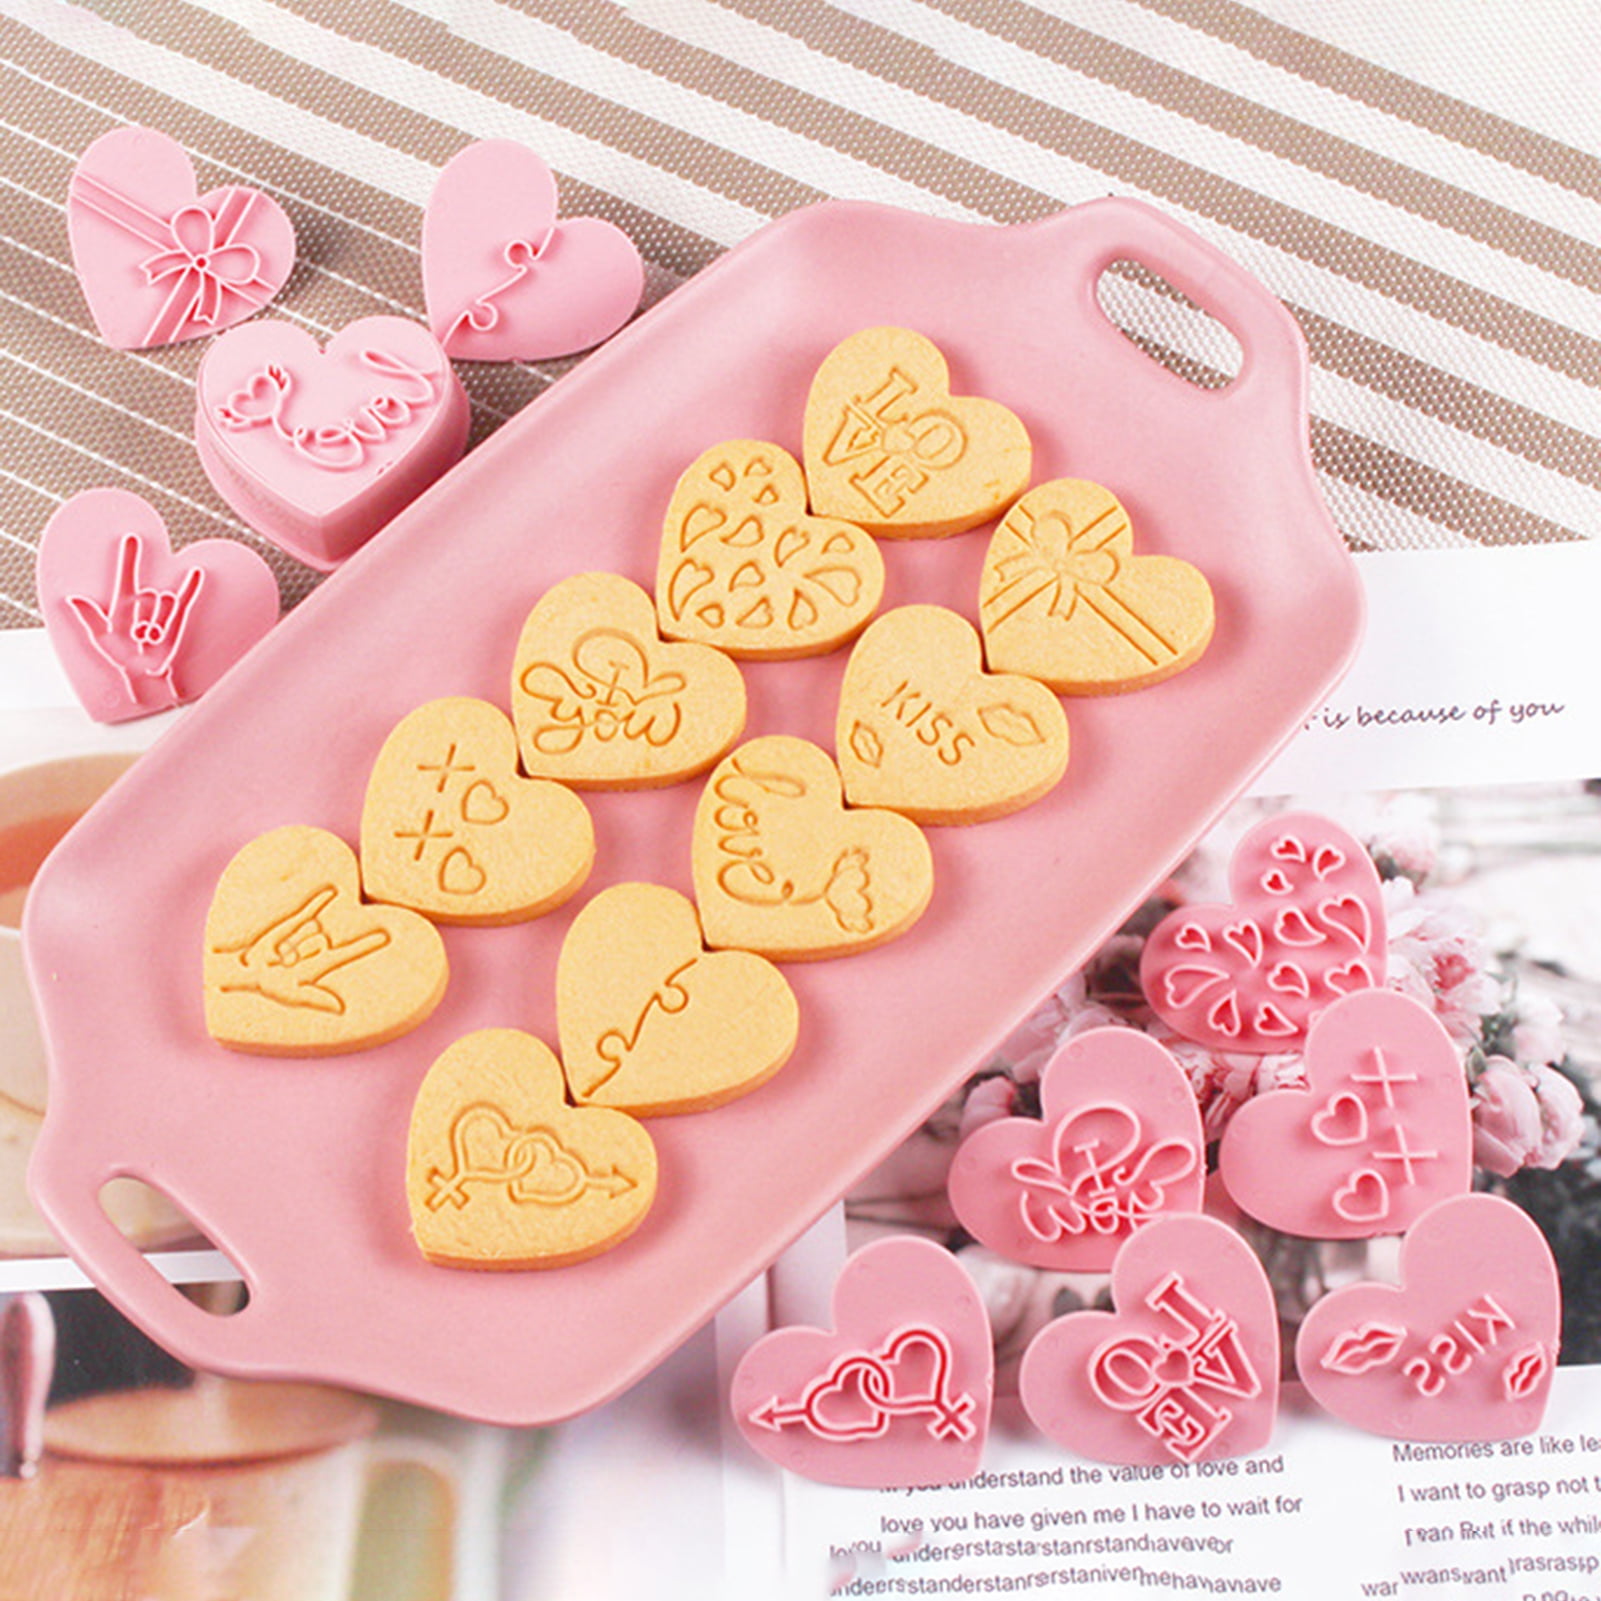  FUSOTO 5PCS Large Heart Cookie Cutter Set, Valentines Day  Cookie Cutters, Love Heart Shaped Cookie Cutter, Mini Heart Cookie Cutter  Shapes,Fondant Metal Cookie Cutter for Homemade Baking Biscuit Molds: Home 